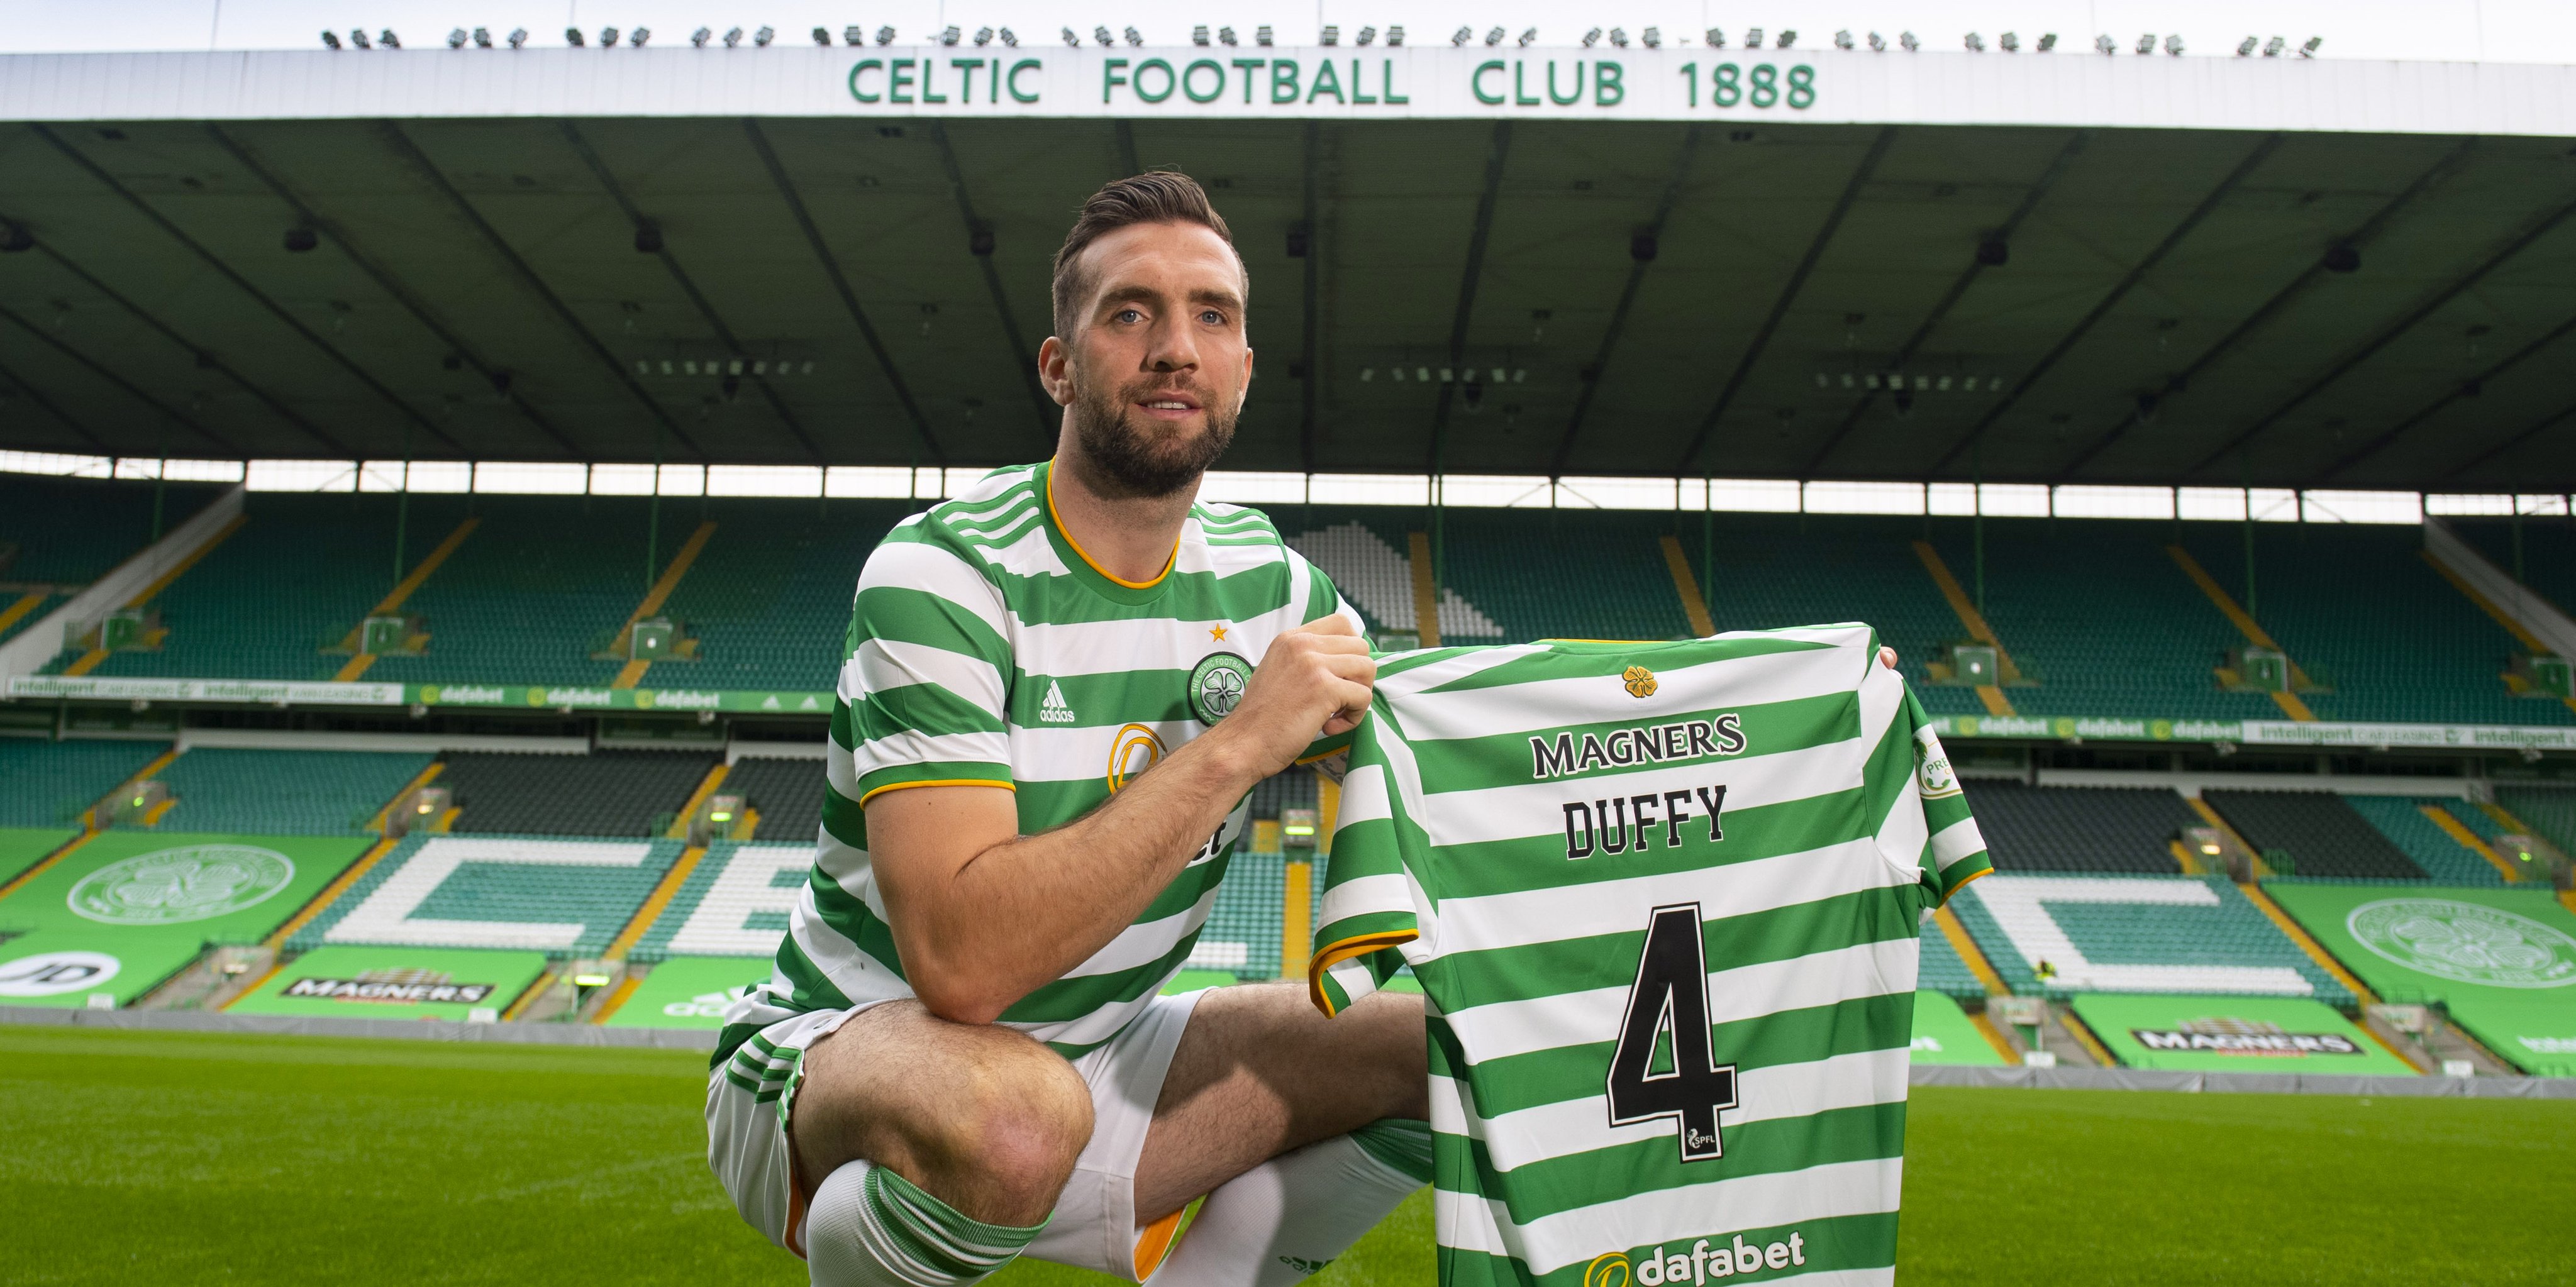 Shane Duffy S Celtic Delight I Gathered How They D Feel About An Irish Man Coming From Where I M From In Derry